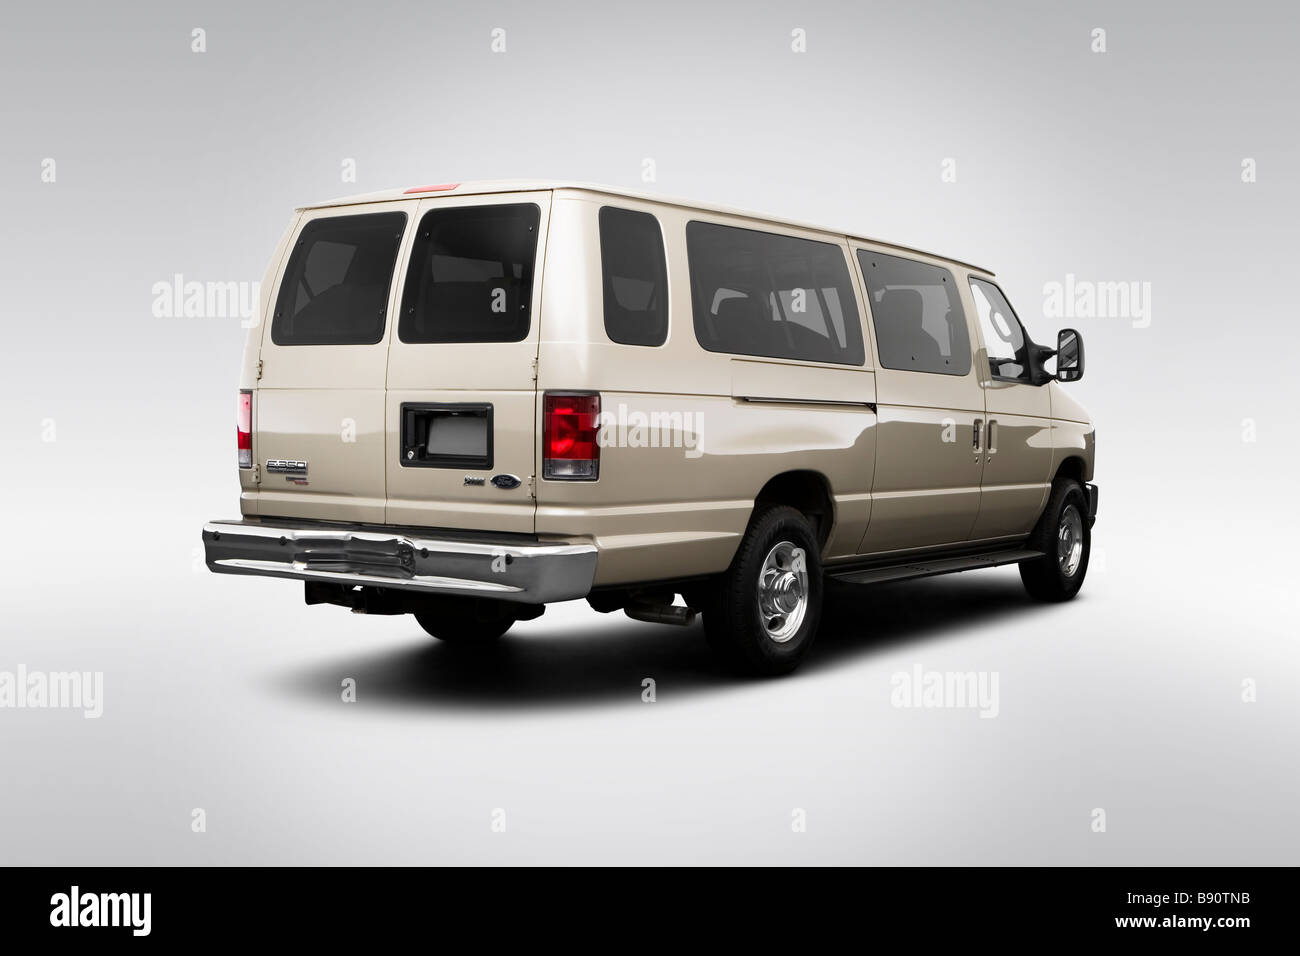 09 Ford E 350 Sd Xlt Extended In Gold Rear Angle View Stock Photo Alamy